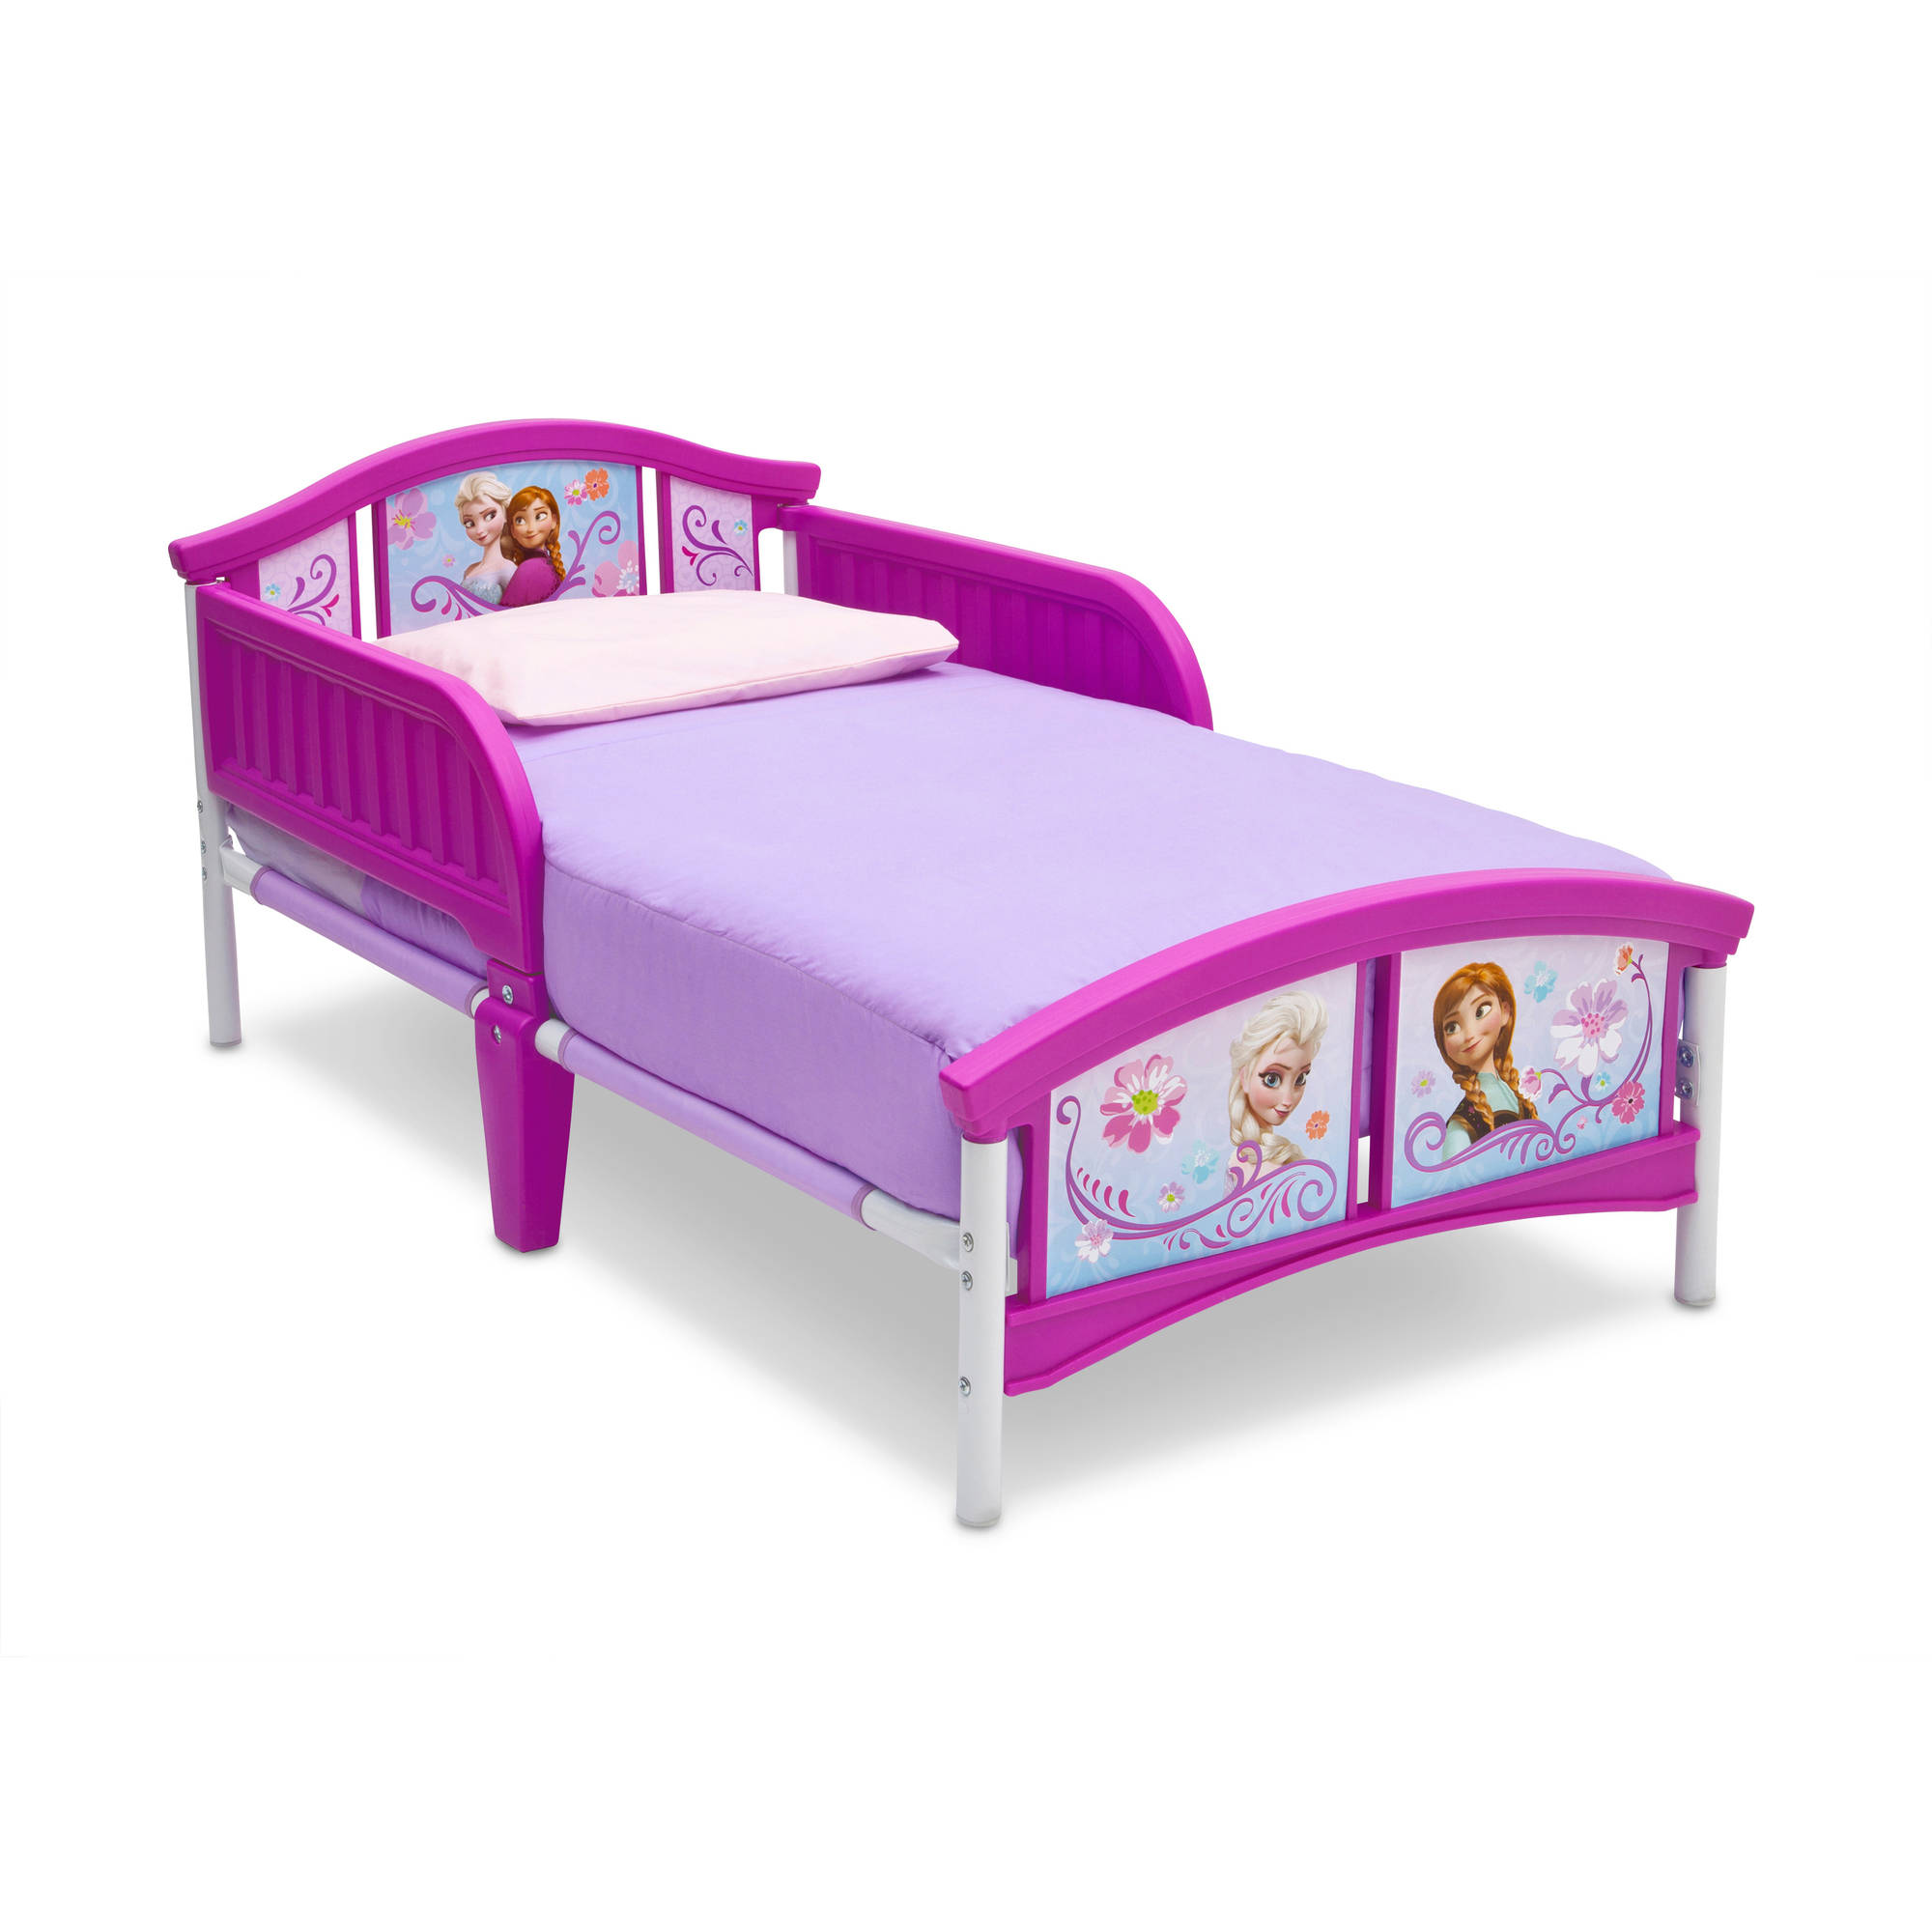 twin bed toddler bedding photo - 8